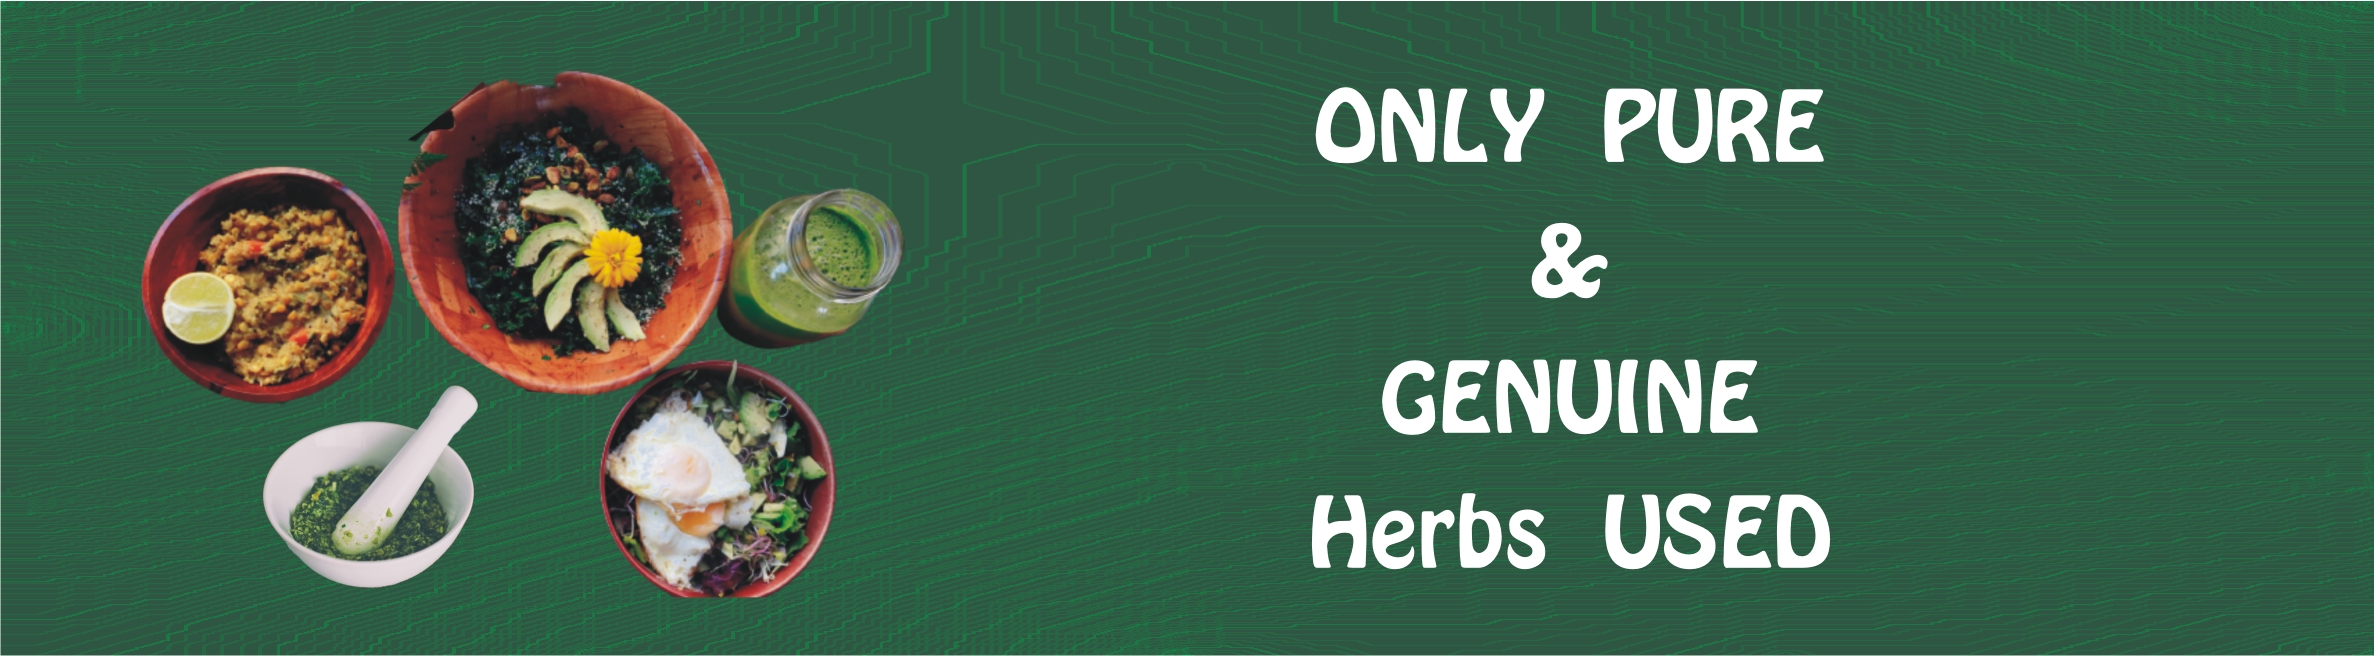 Only Pure Herbs Used in Manufacturing